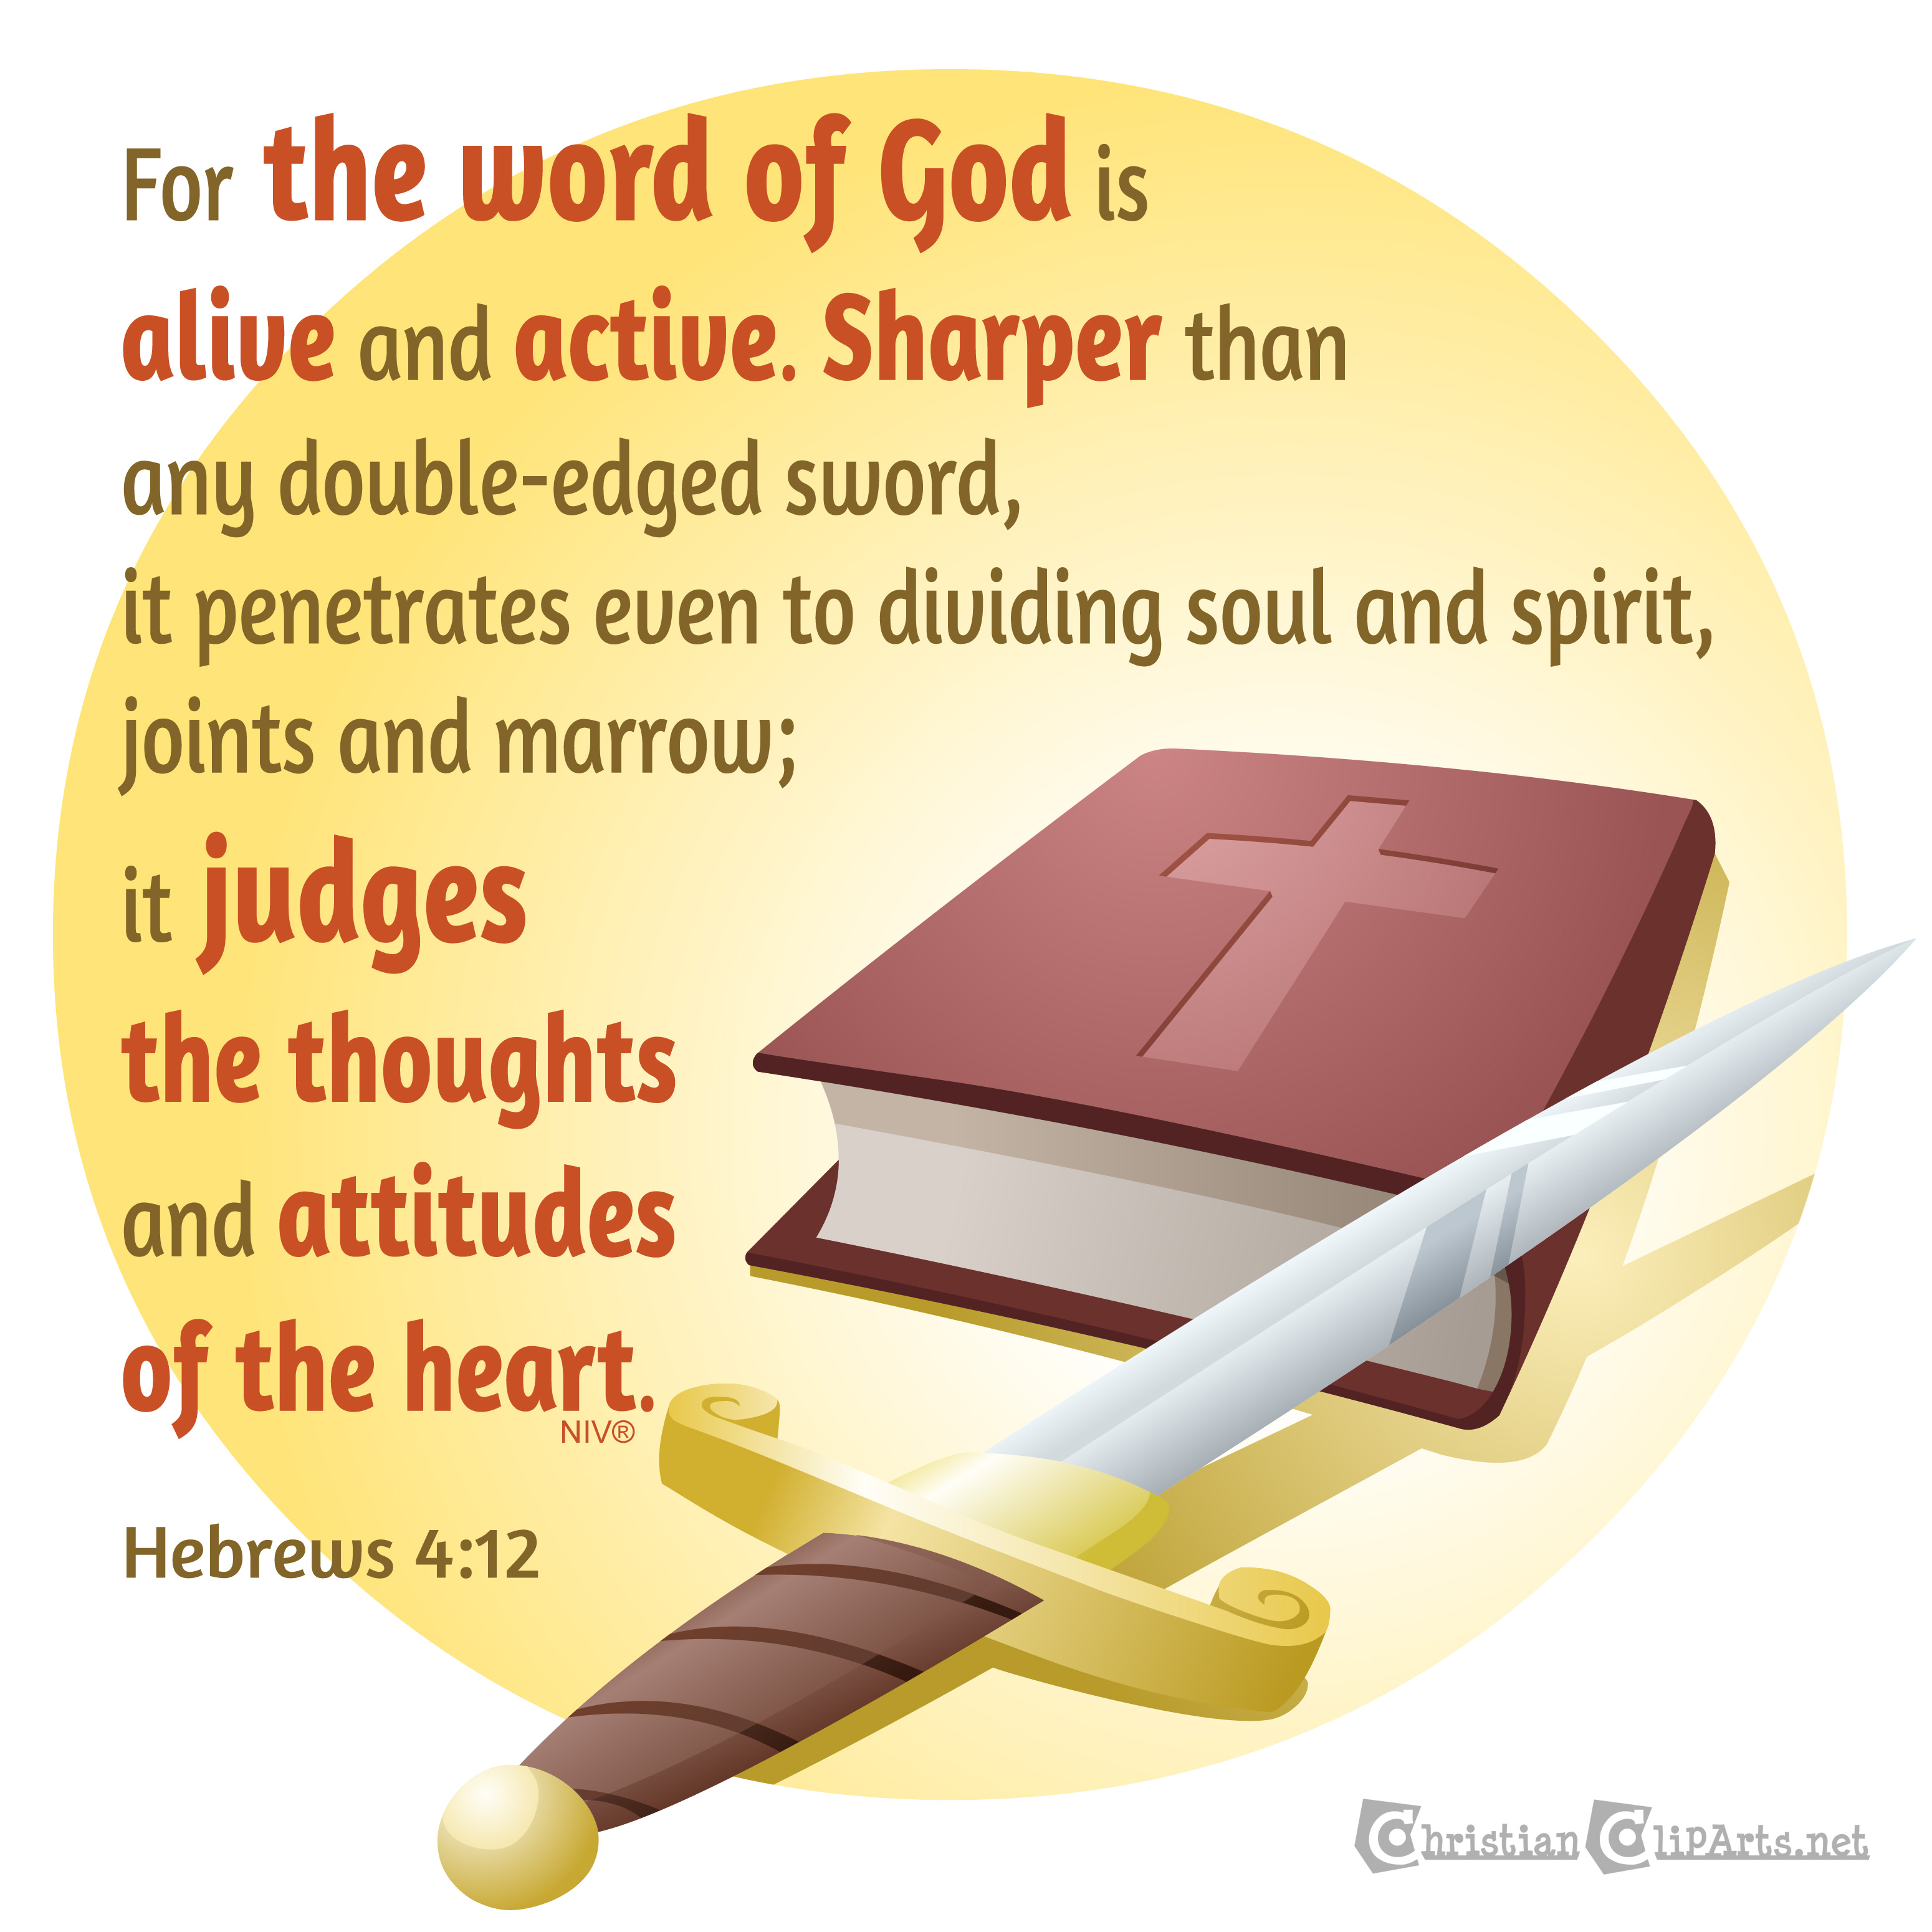 The word of God is living